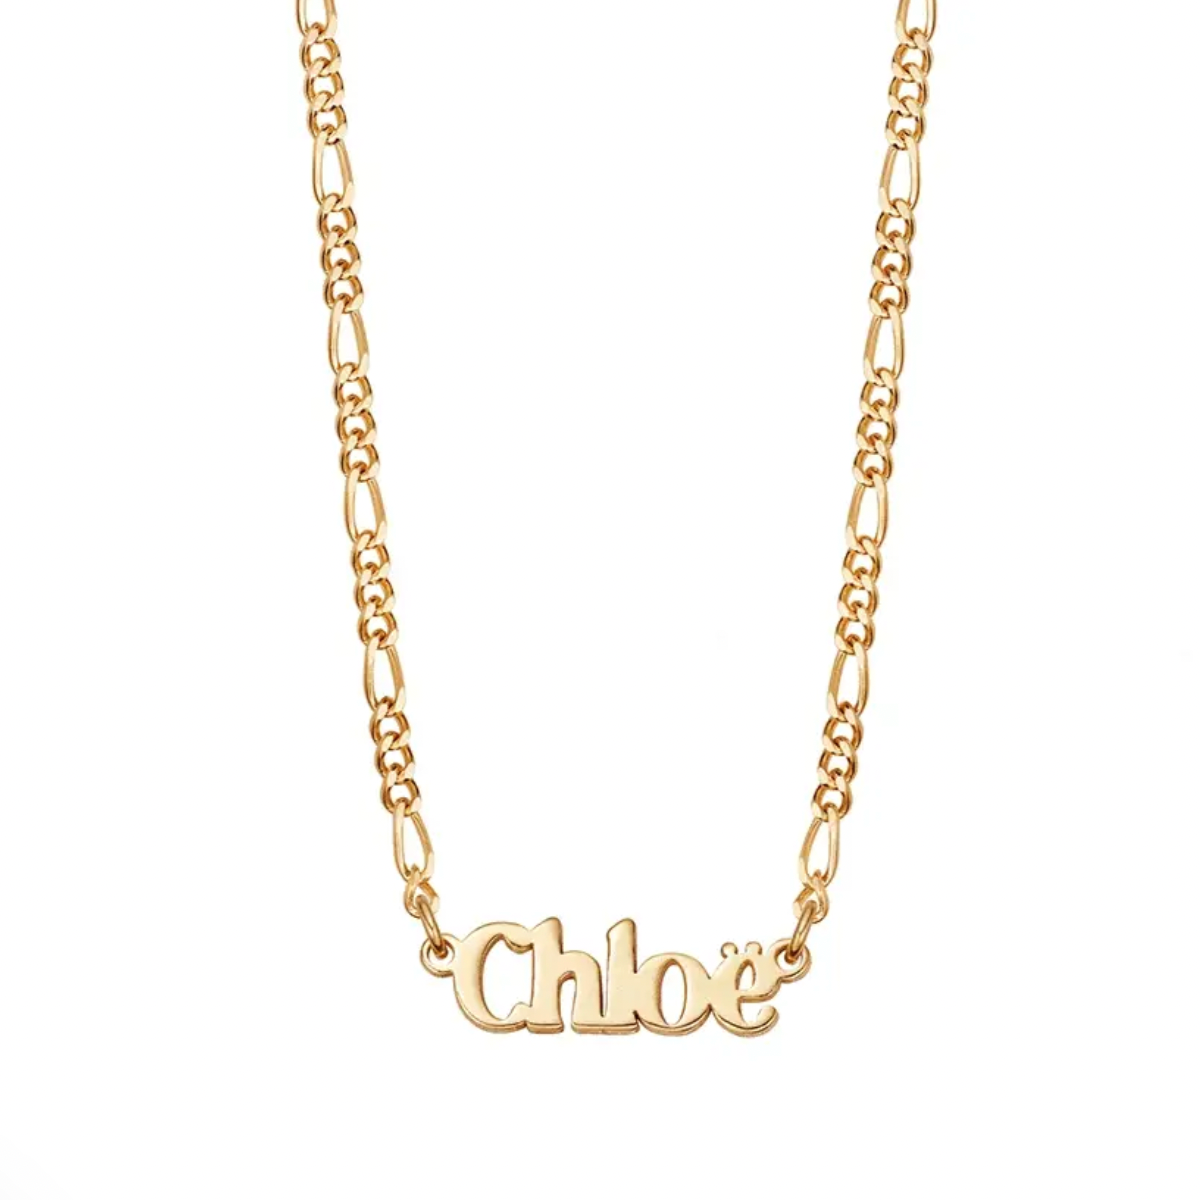 Daisy Personalised Name Necklace, Gold